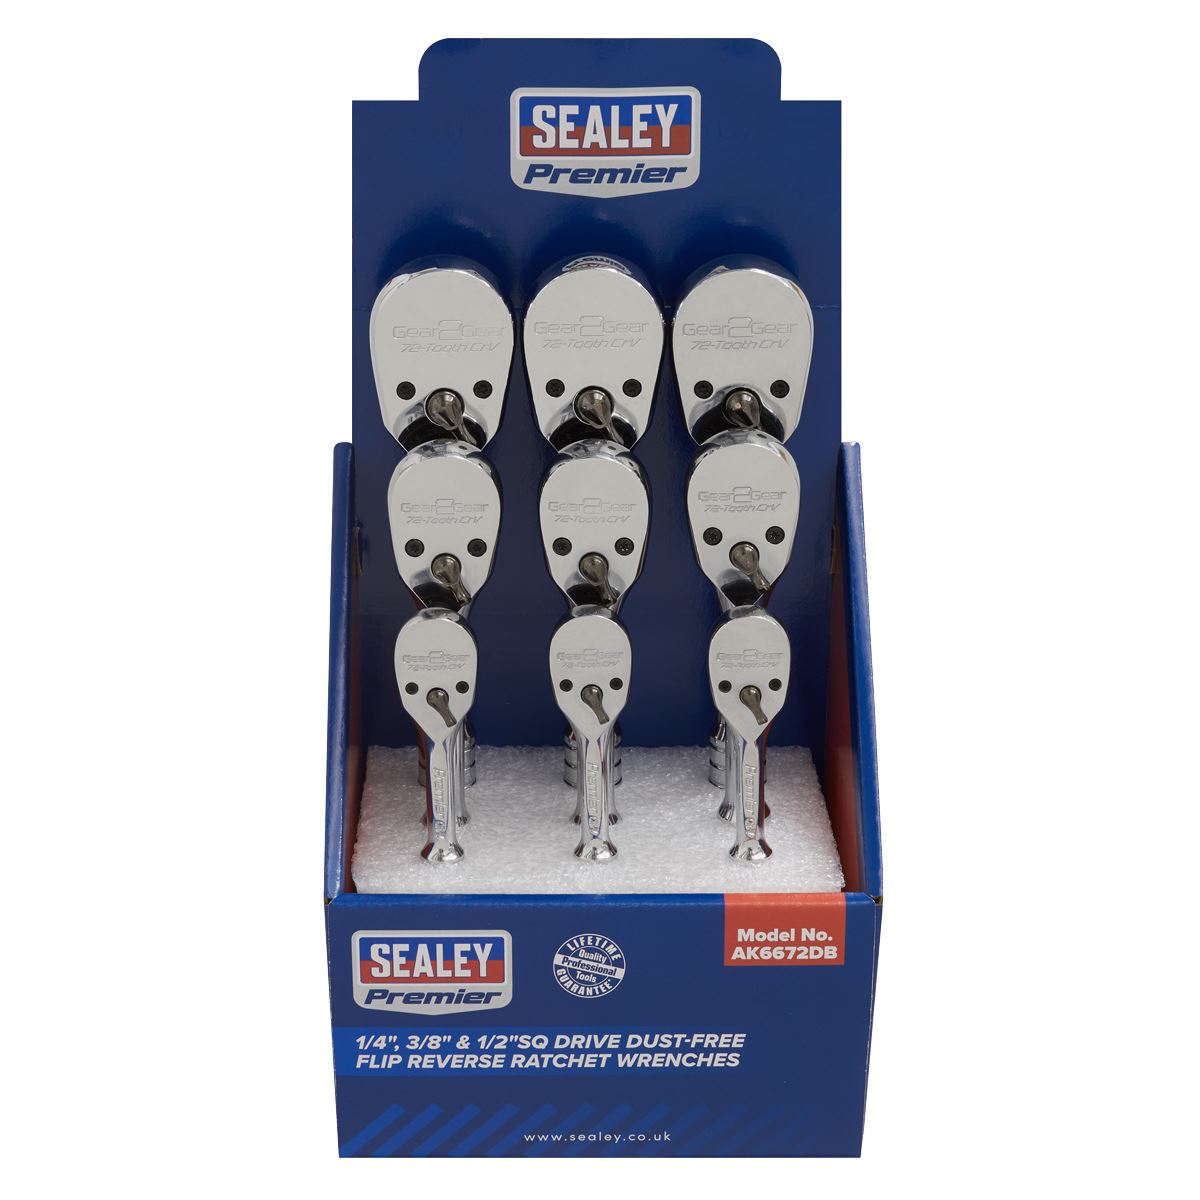 Sealey Premier Ratchet Wrenches 1/4", 3/8" & 1/2"Sq Drive Pear-Head Flip Reverse Display Box of 9